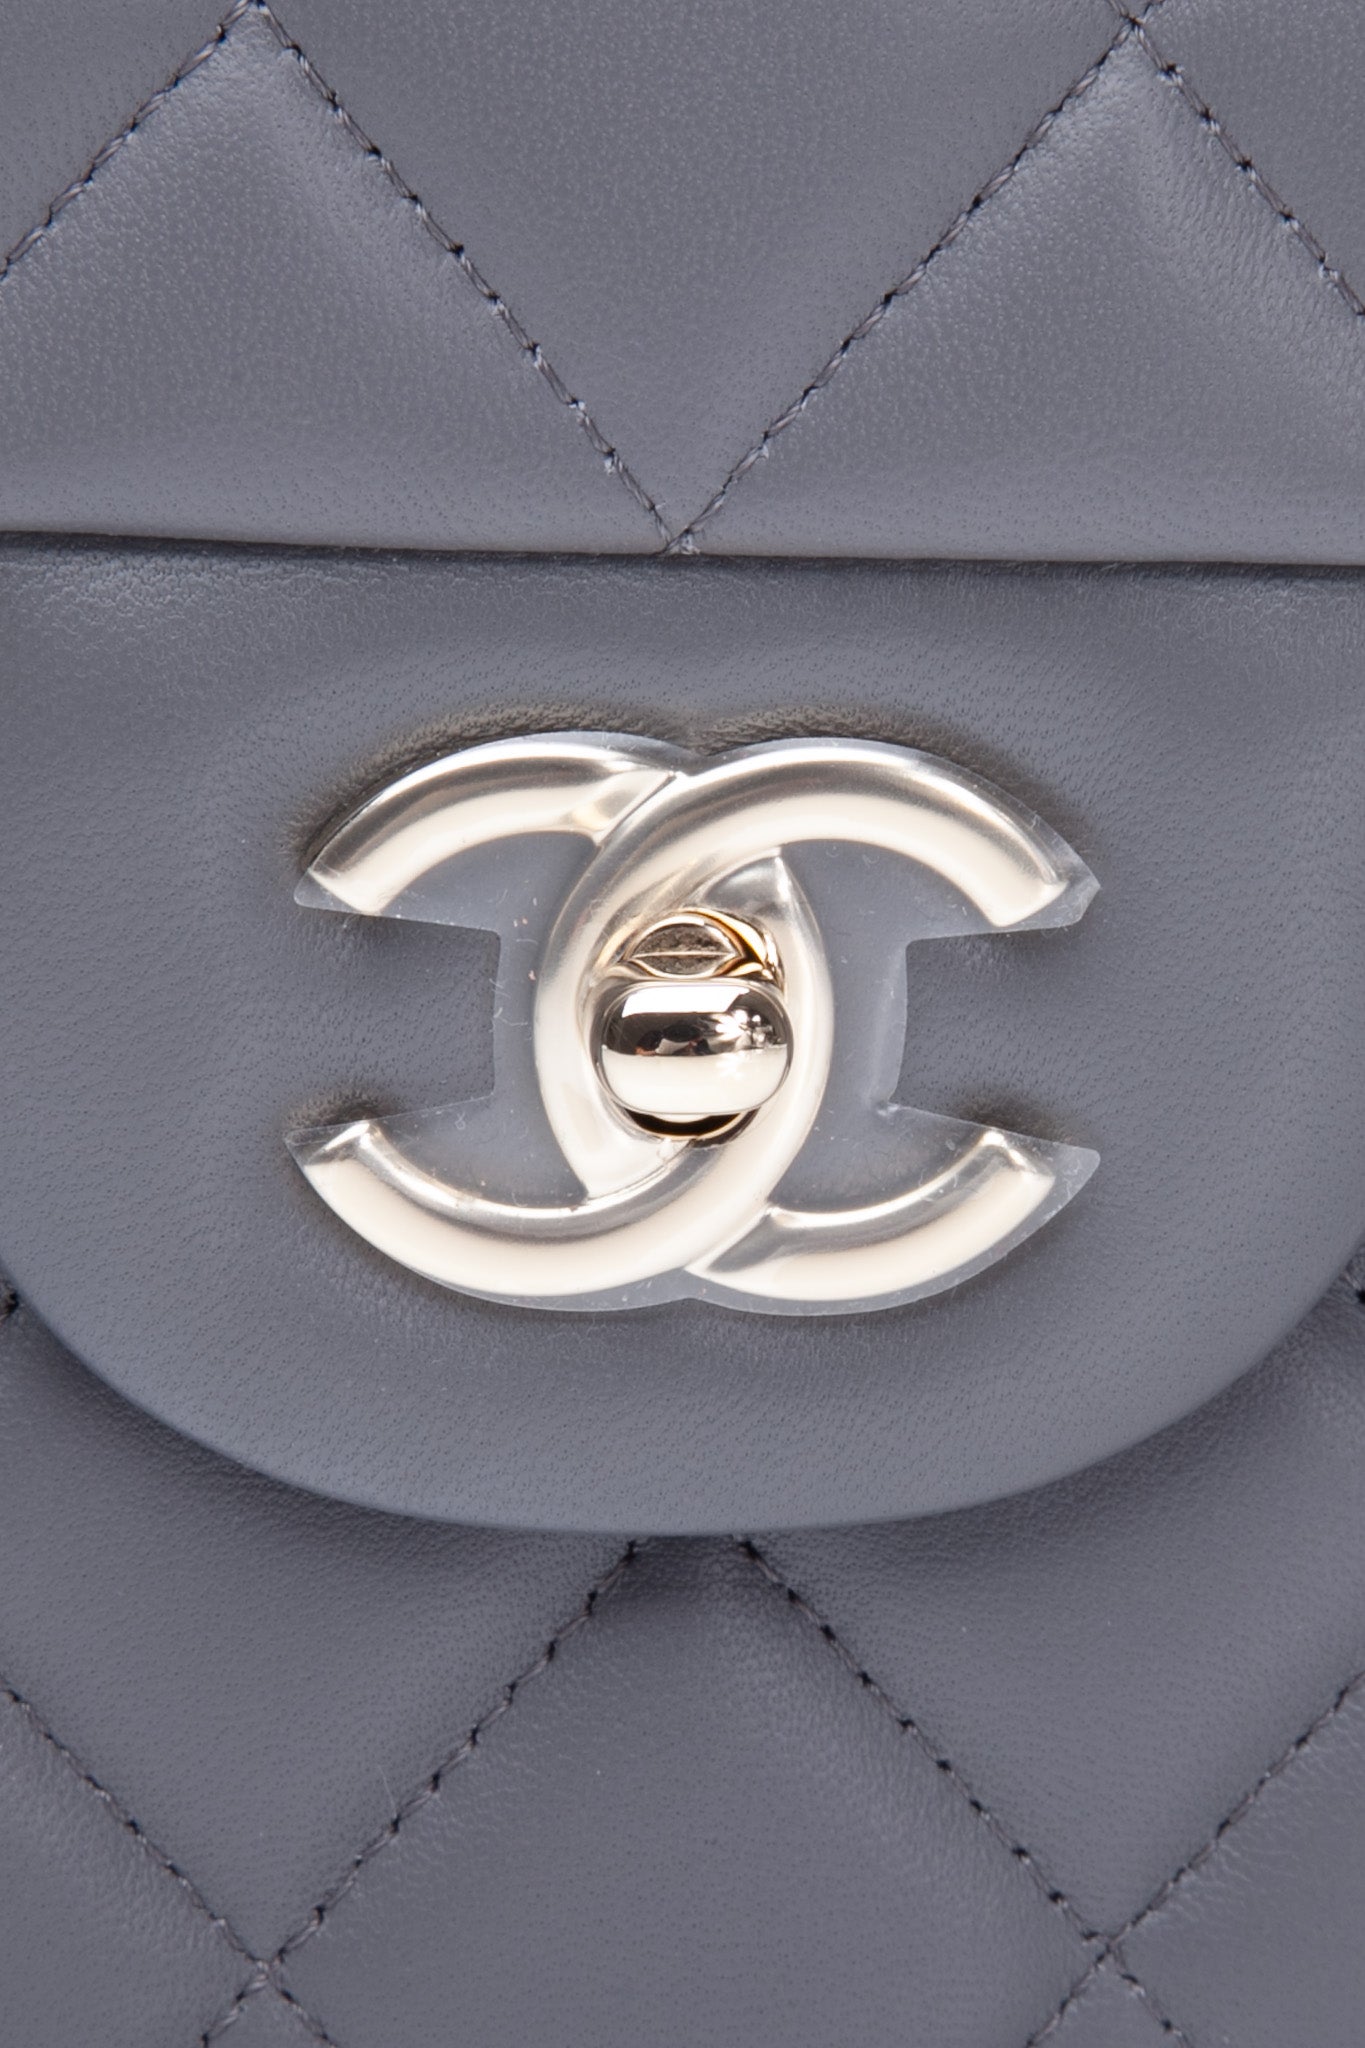 CHANEL Grey Lambskin Quilted Jumbo Double Flap Bag